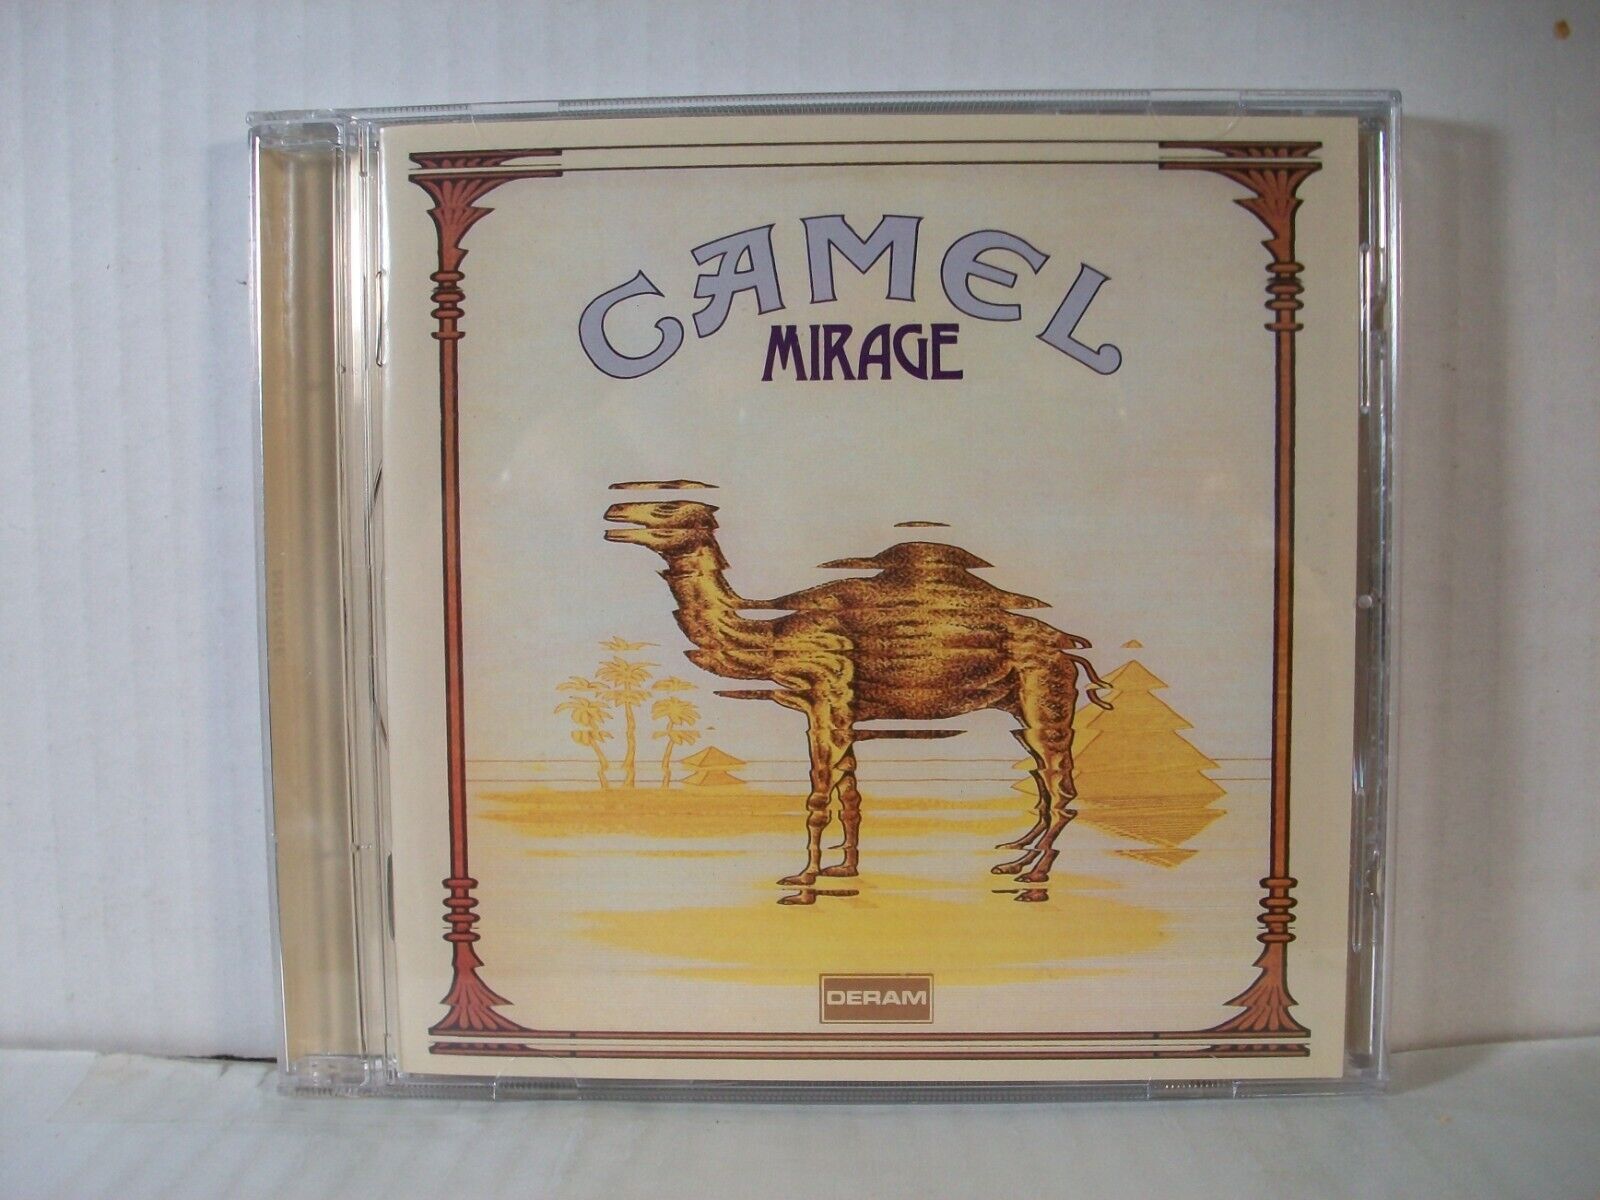 Mirage by Camel    (CD, 2002)   (Like New)